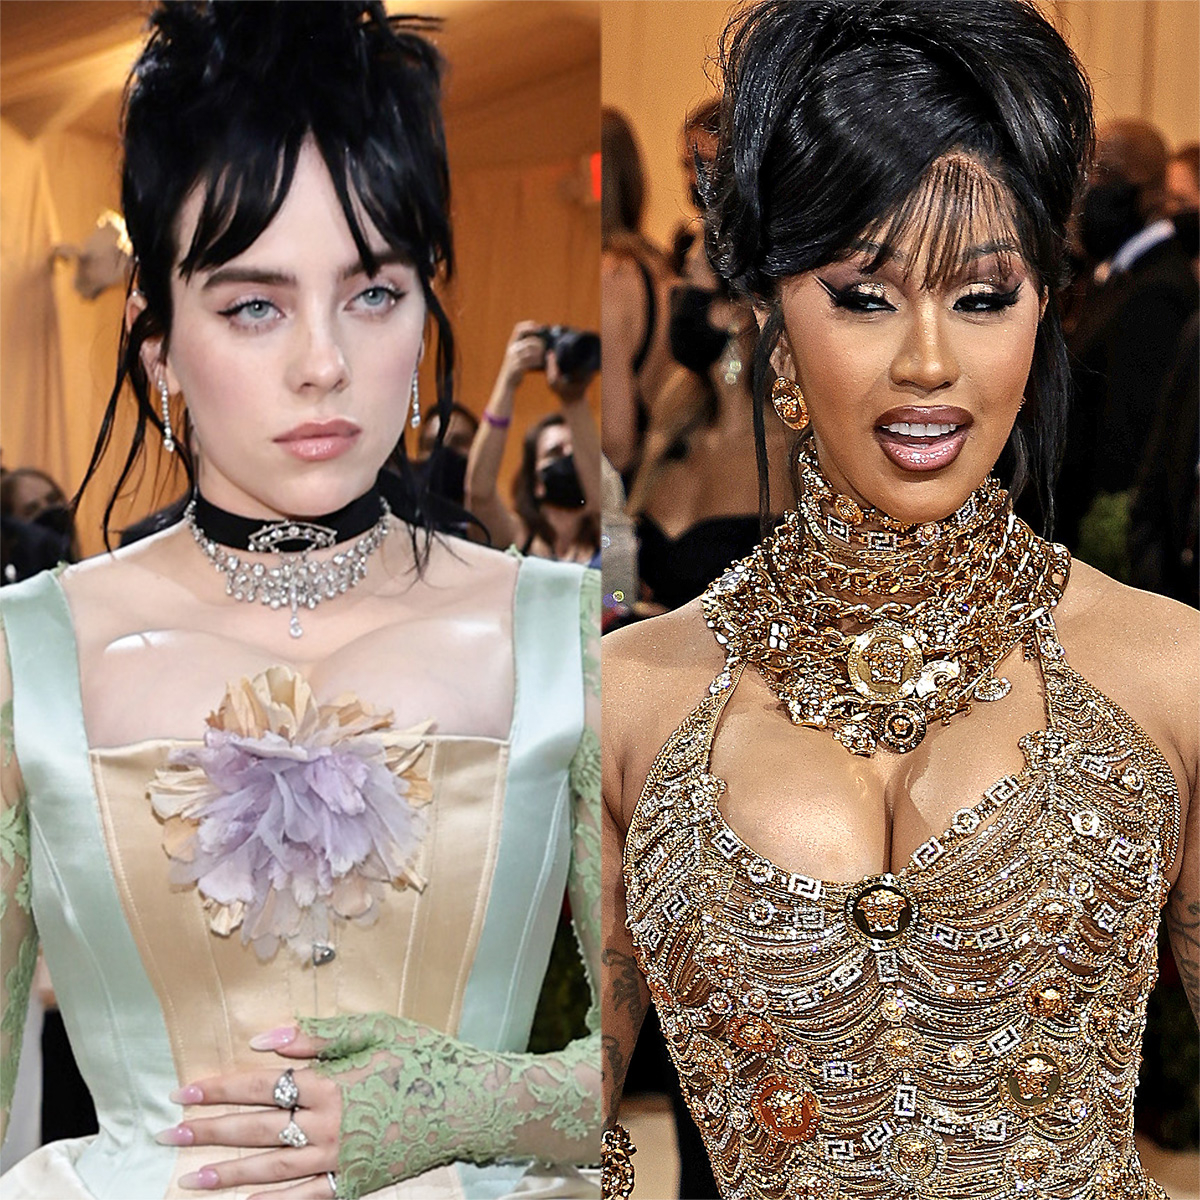 Celebs in Burberry: Naomi Campbell, Billie Eilish, More